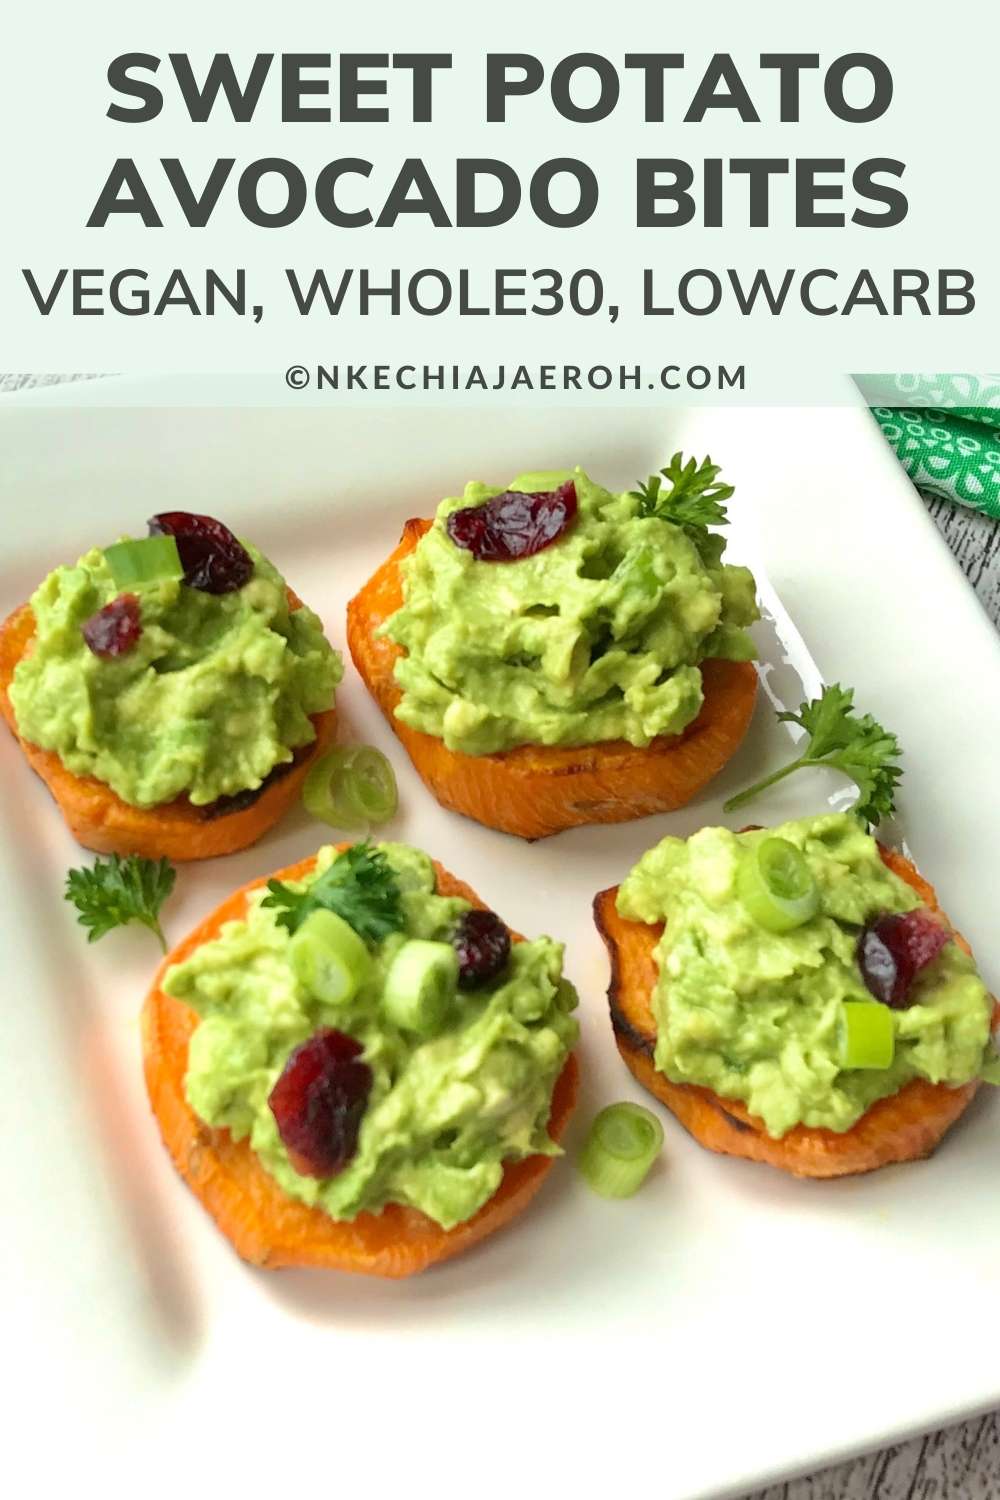 Healthy baked sweet potato avocado bites - vegan, gluten-free, low carb, and easy to make! These sweet potato cups are the easiest foods to cook, and they are loaded with guacamole. Perfect combo for the best appetizer, side dish, snacks, these vegan roasted sweet potato rounds, smashed avocado are just the best finger foods. and a healthy and delicious appetizer, snacks, side dish, or meal! #sweetpotato #Bakebites #sidedish #appetizer #healthyappetizer #sweetpotatoside #guacamole